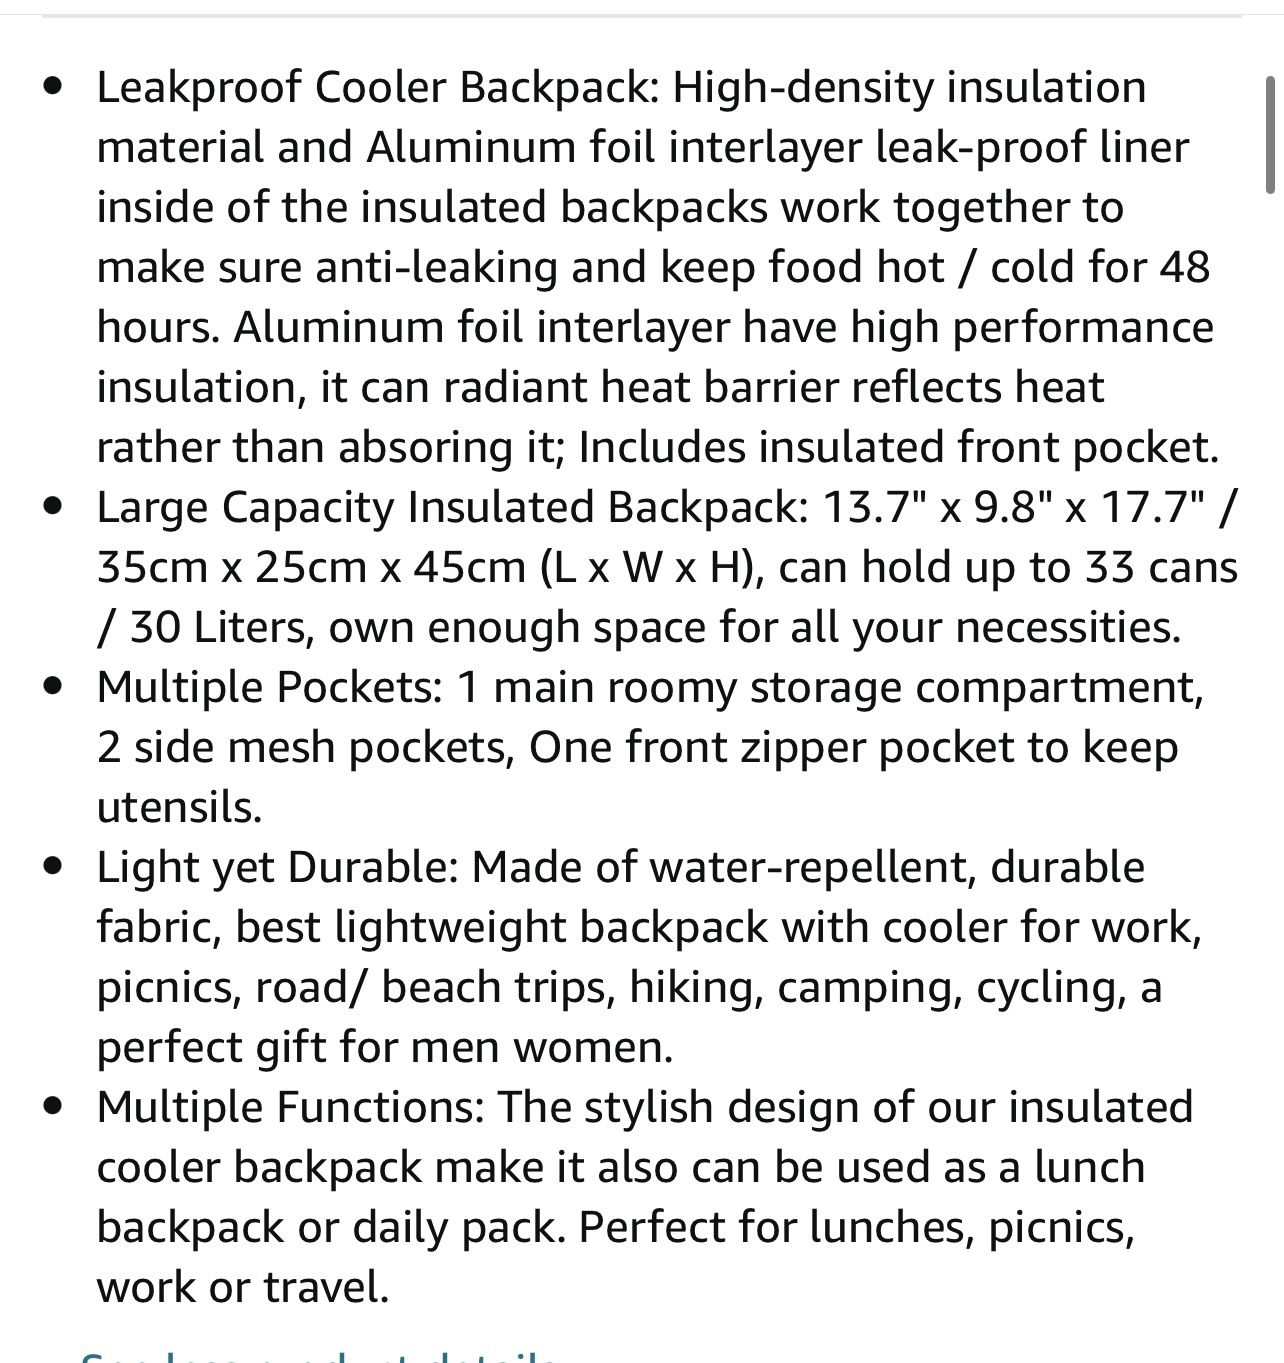 NEW Insulated cooler backpack